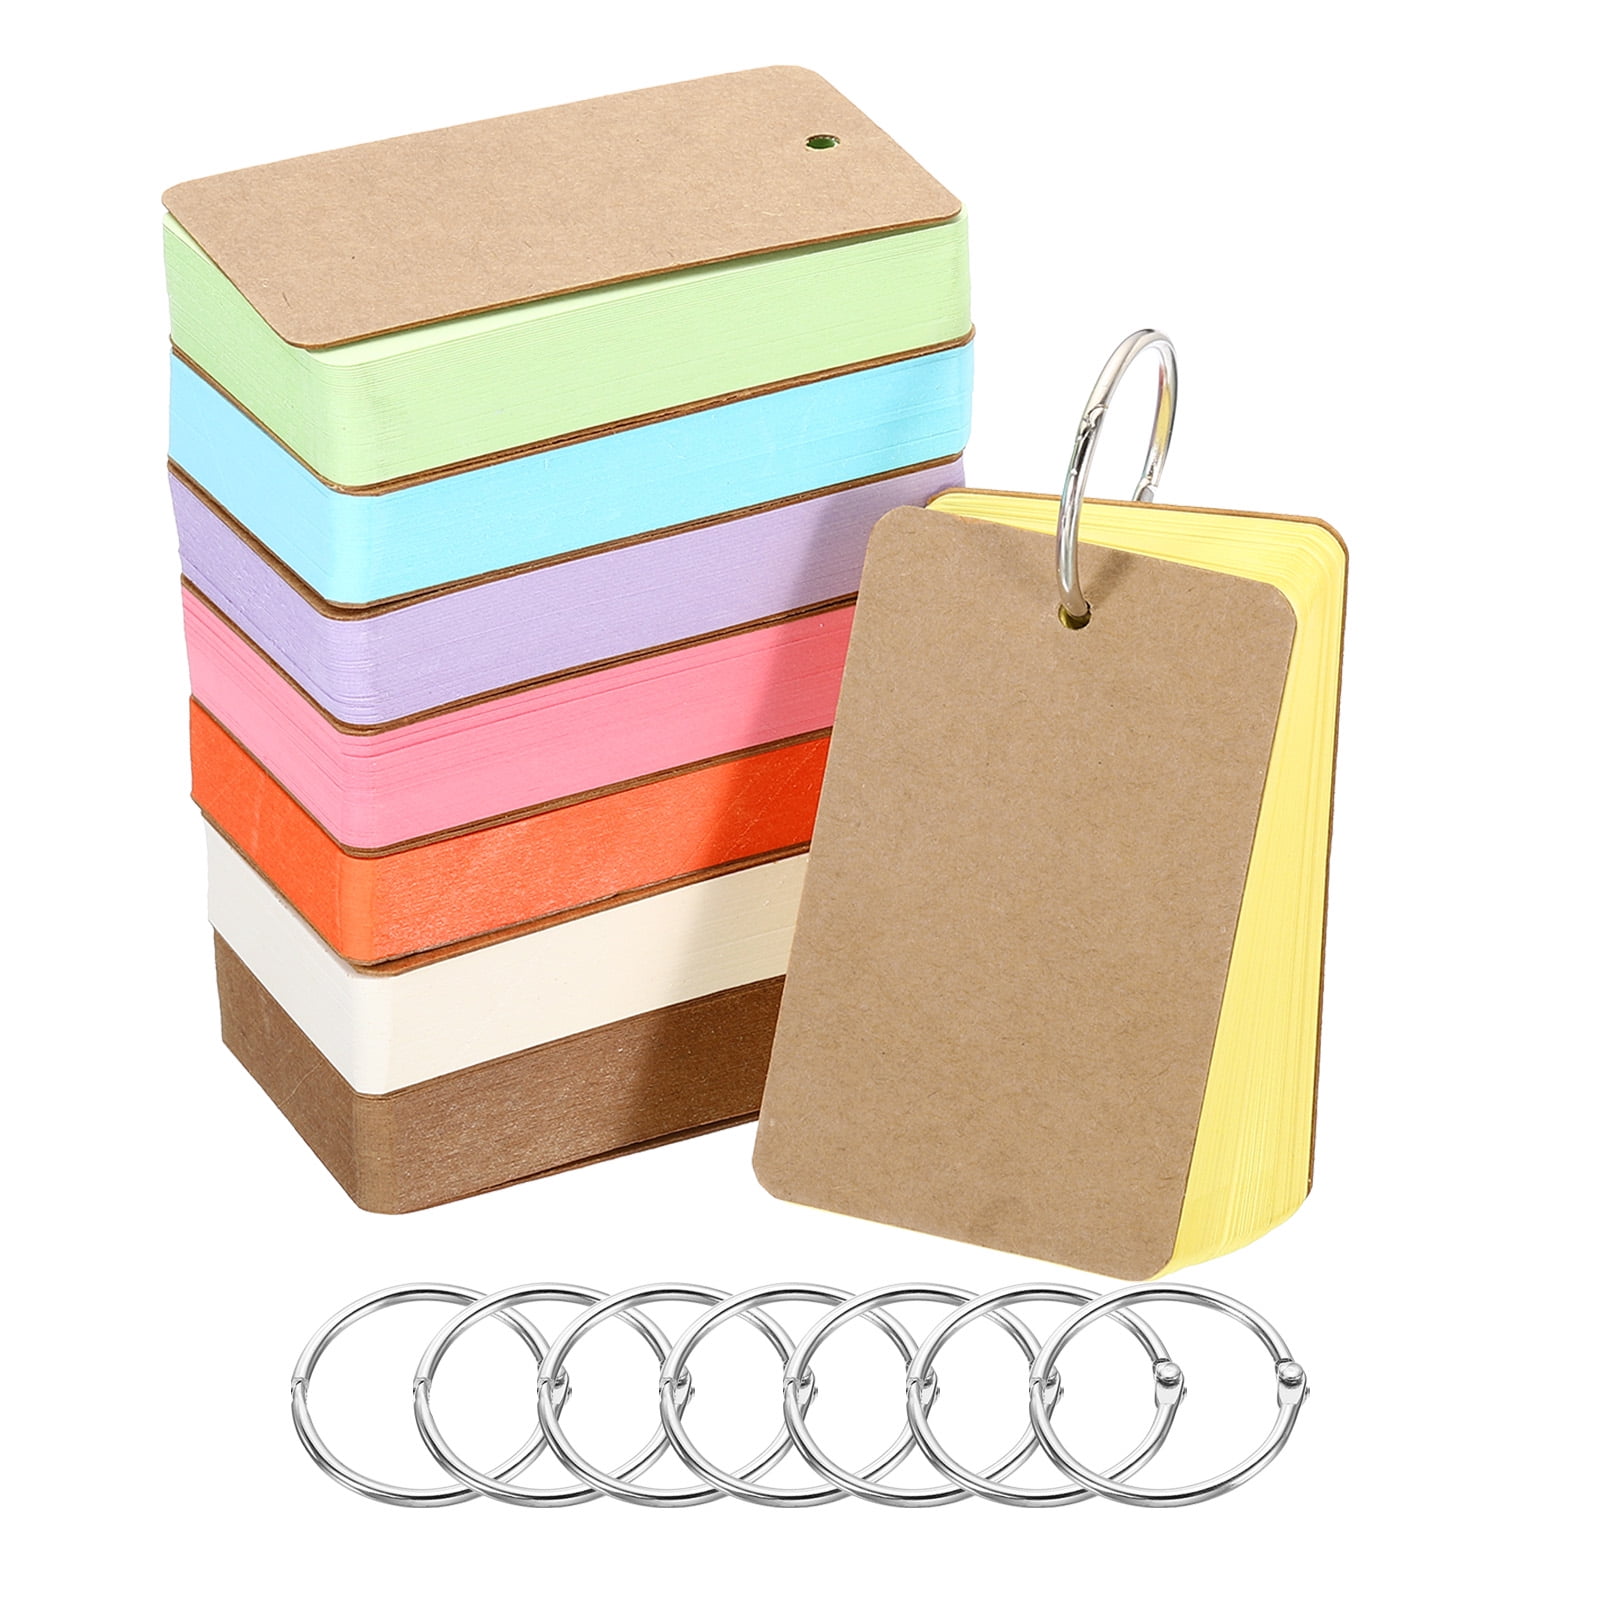 Home Advantage Ruled White Index Cards, File Lined Note Cards (5x7)